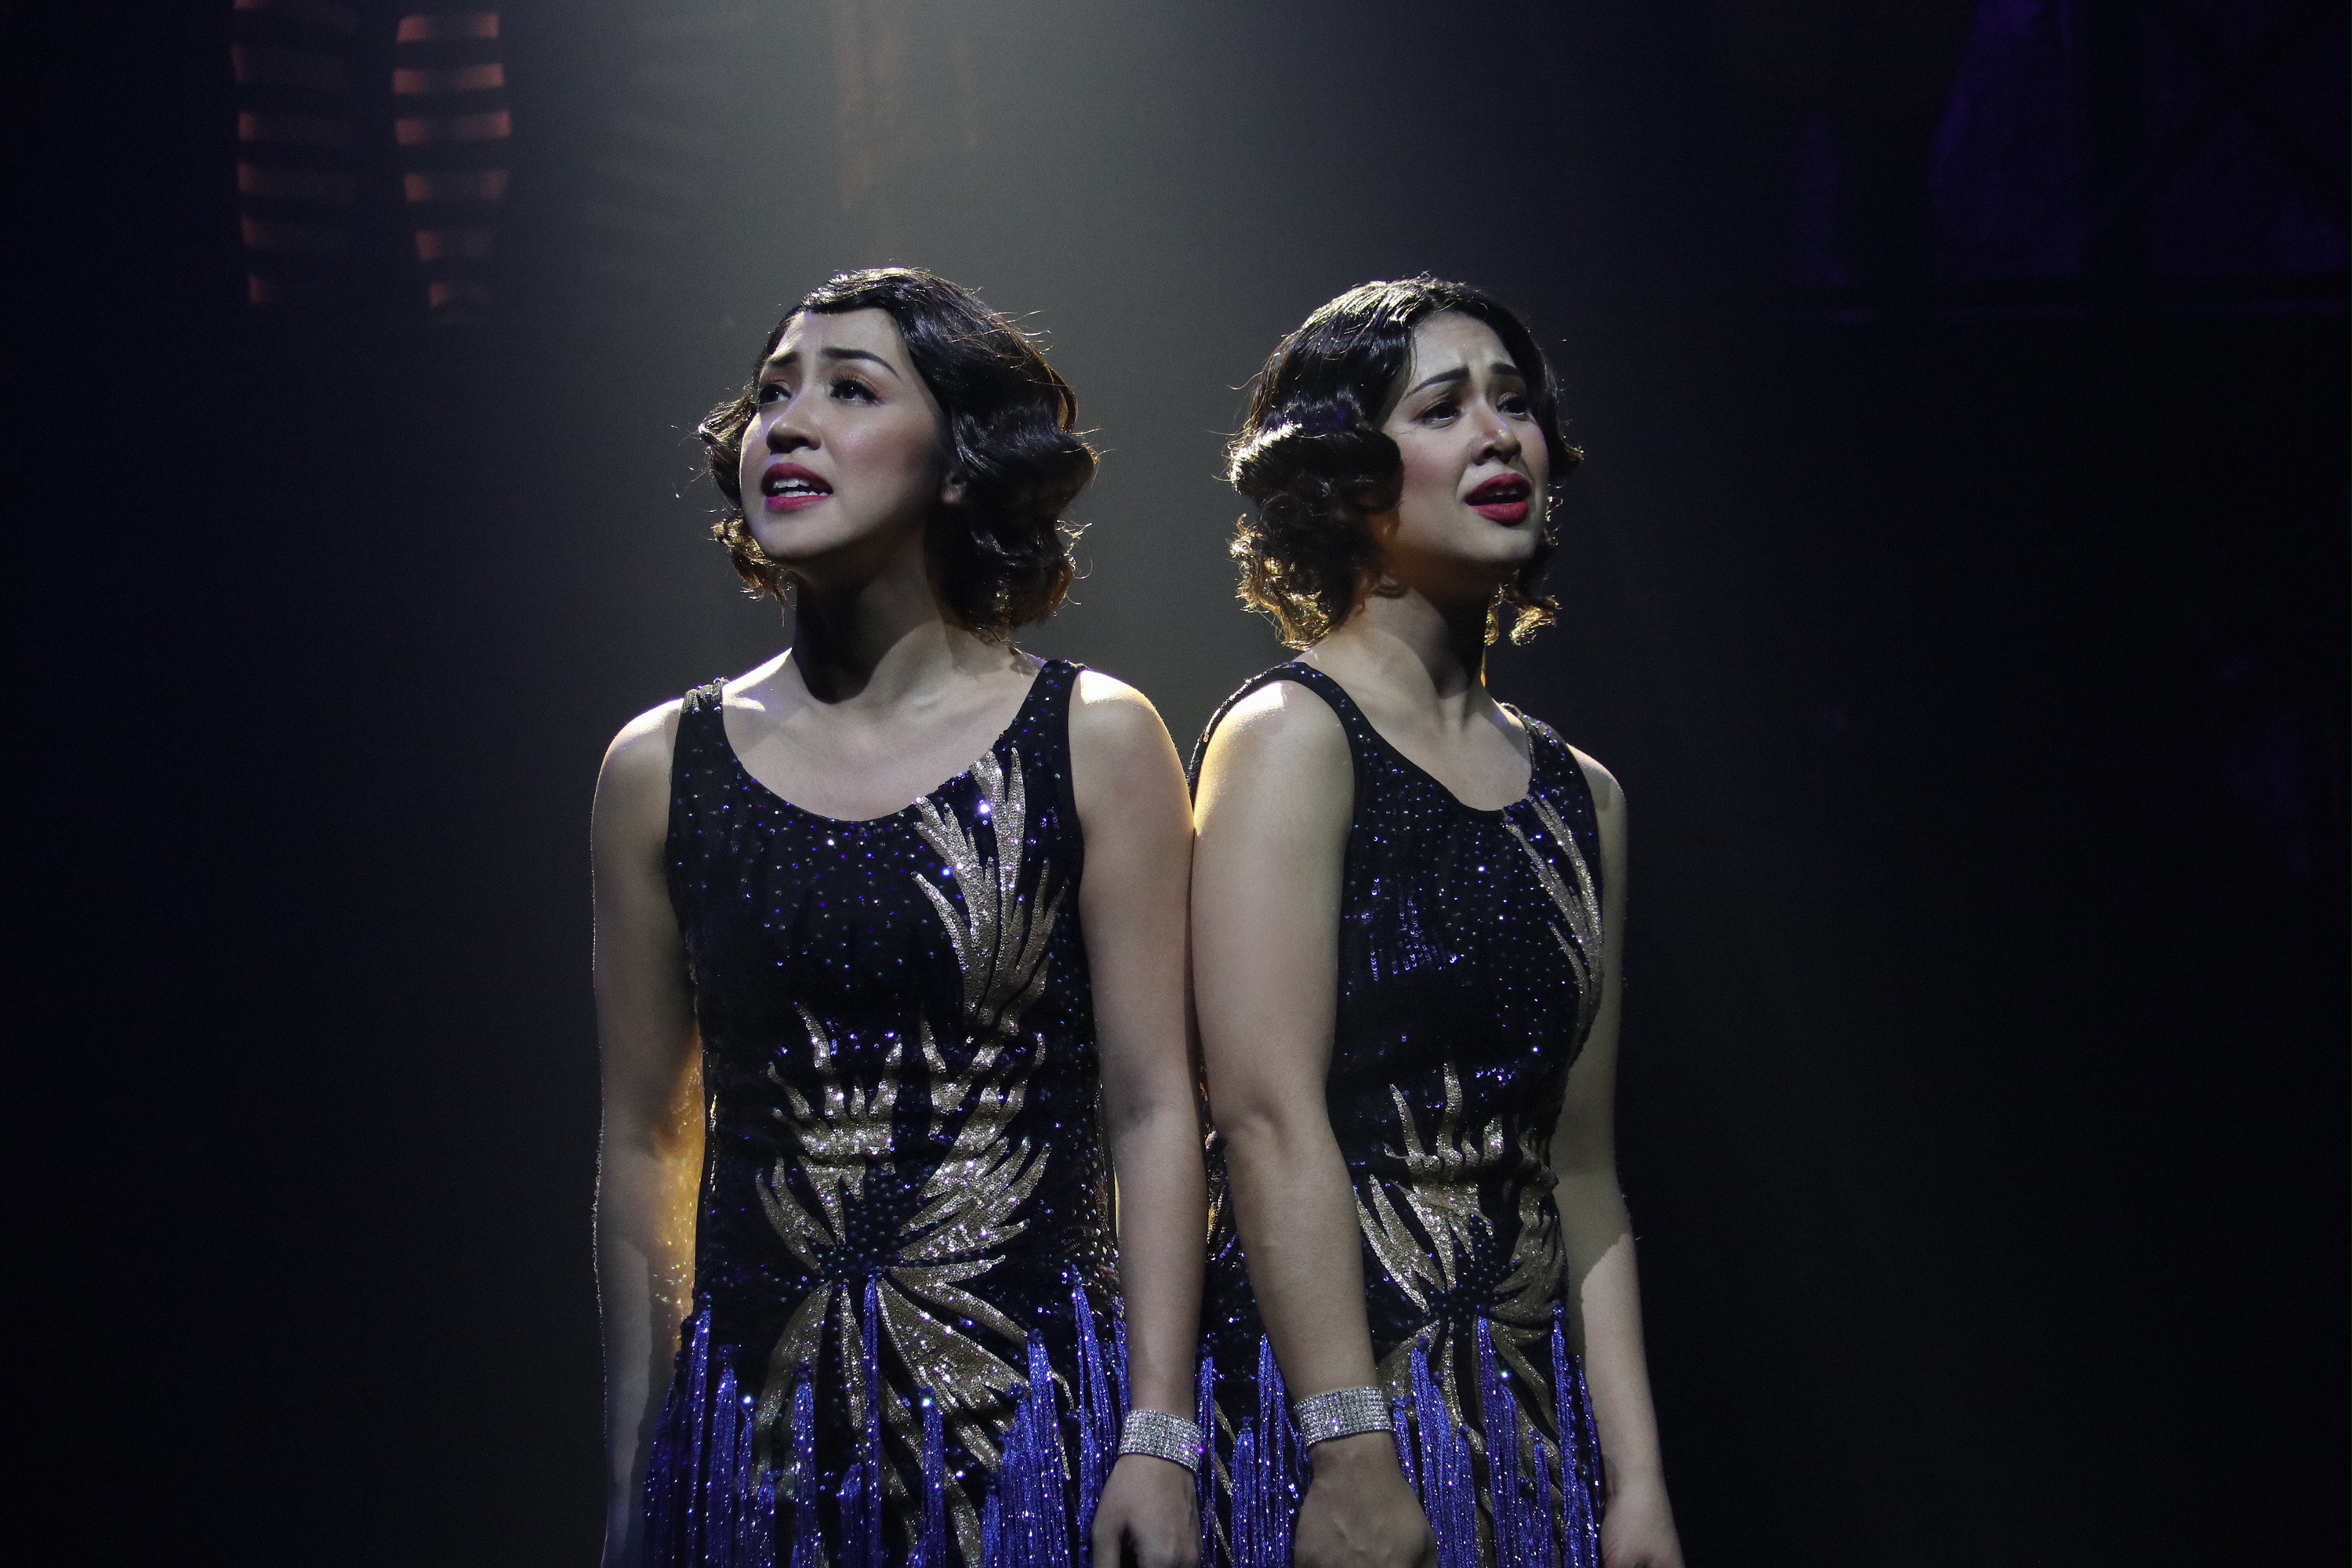 Gab Pangilinan and Kayla Rivera in Atlantis Theatrical’s “Side Show,” directed by Steven Conde. ATLANTIS THEATRICAL